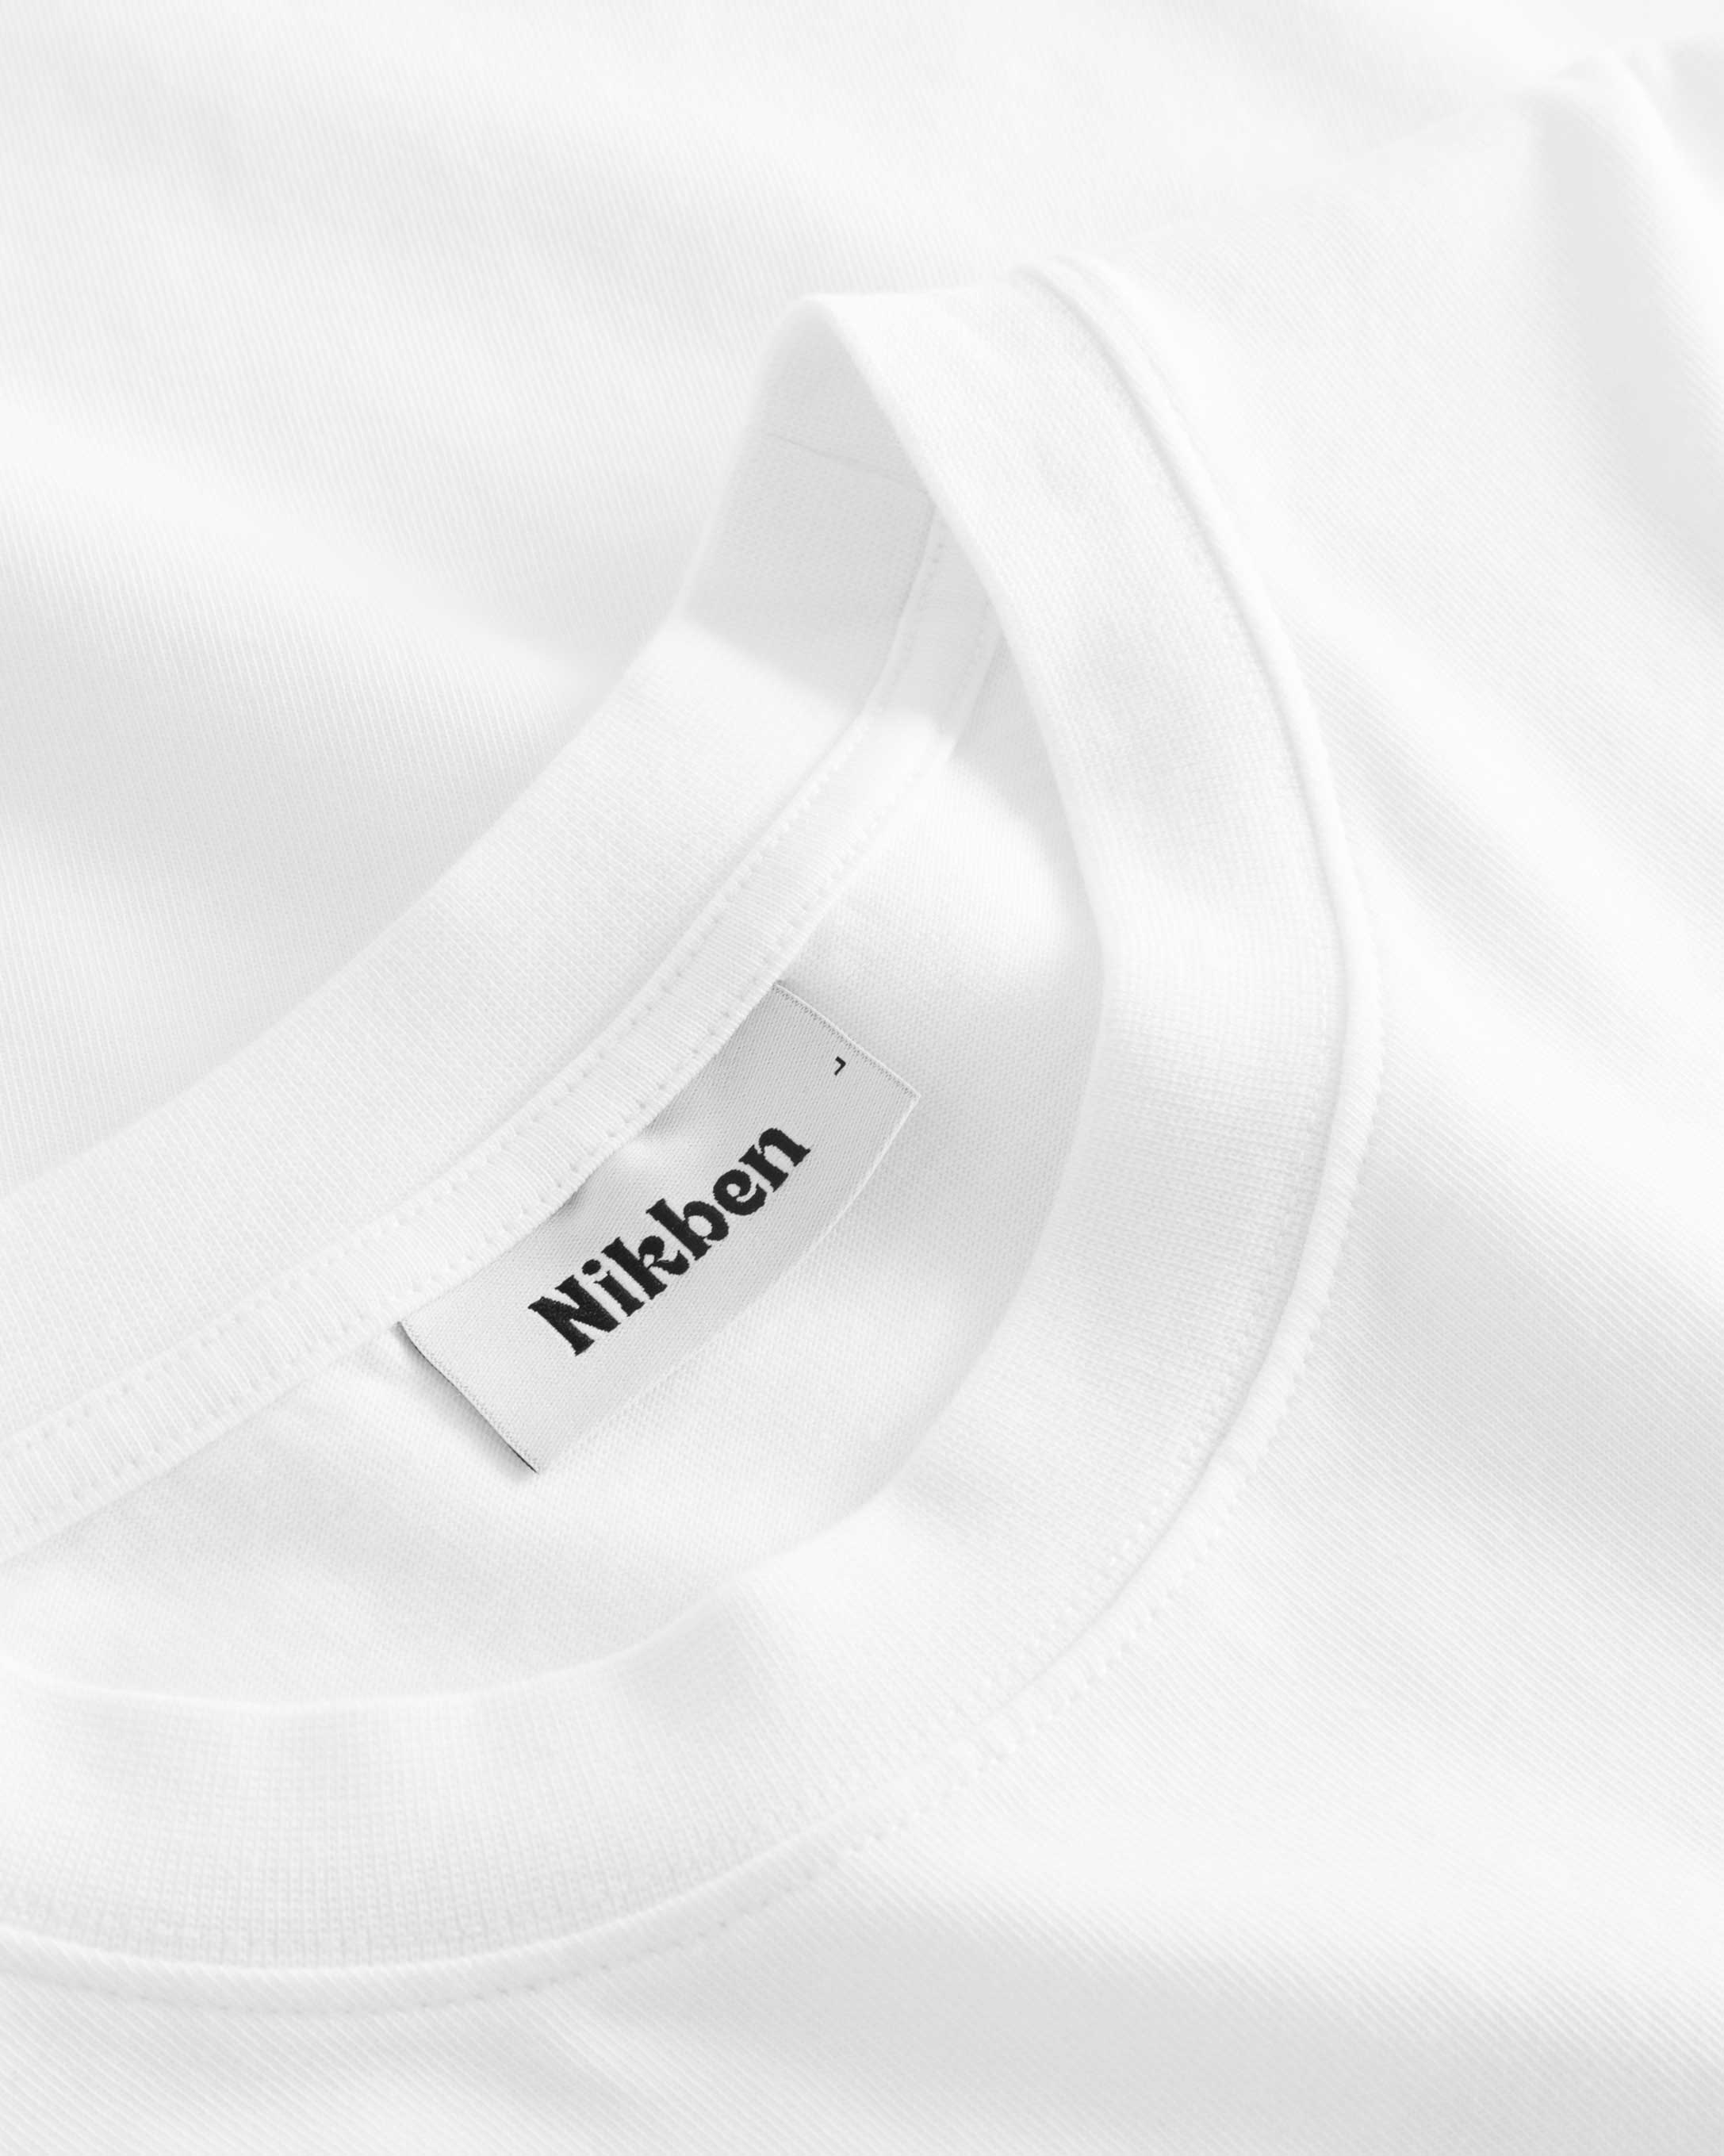 Close-up view of the round neck and stitchings on white t-shirt.